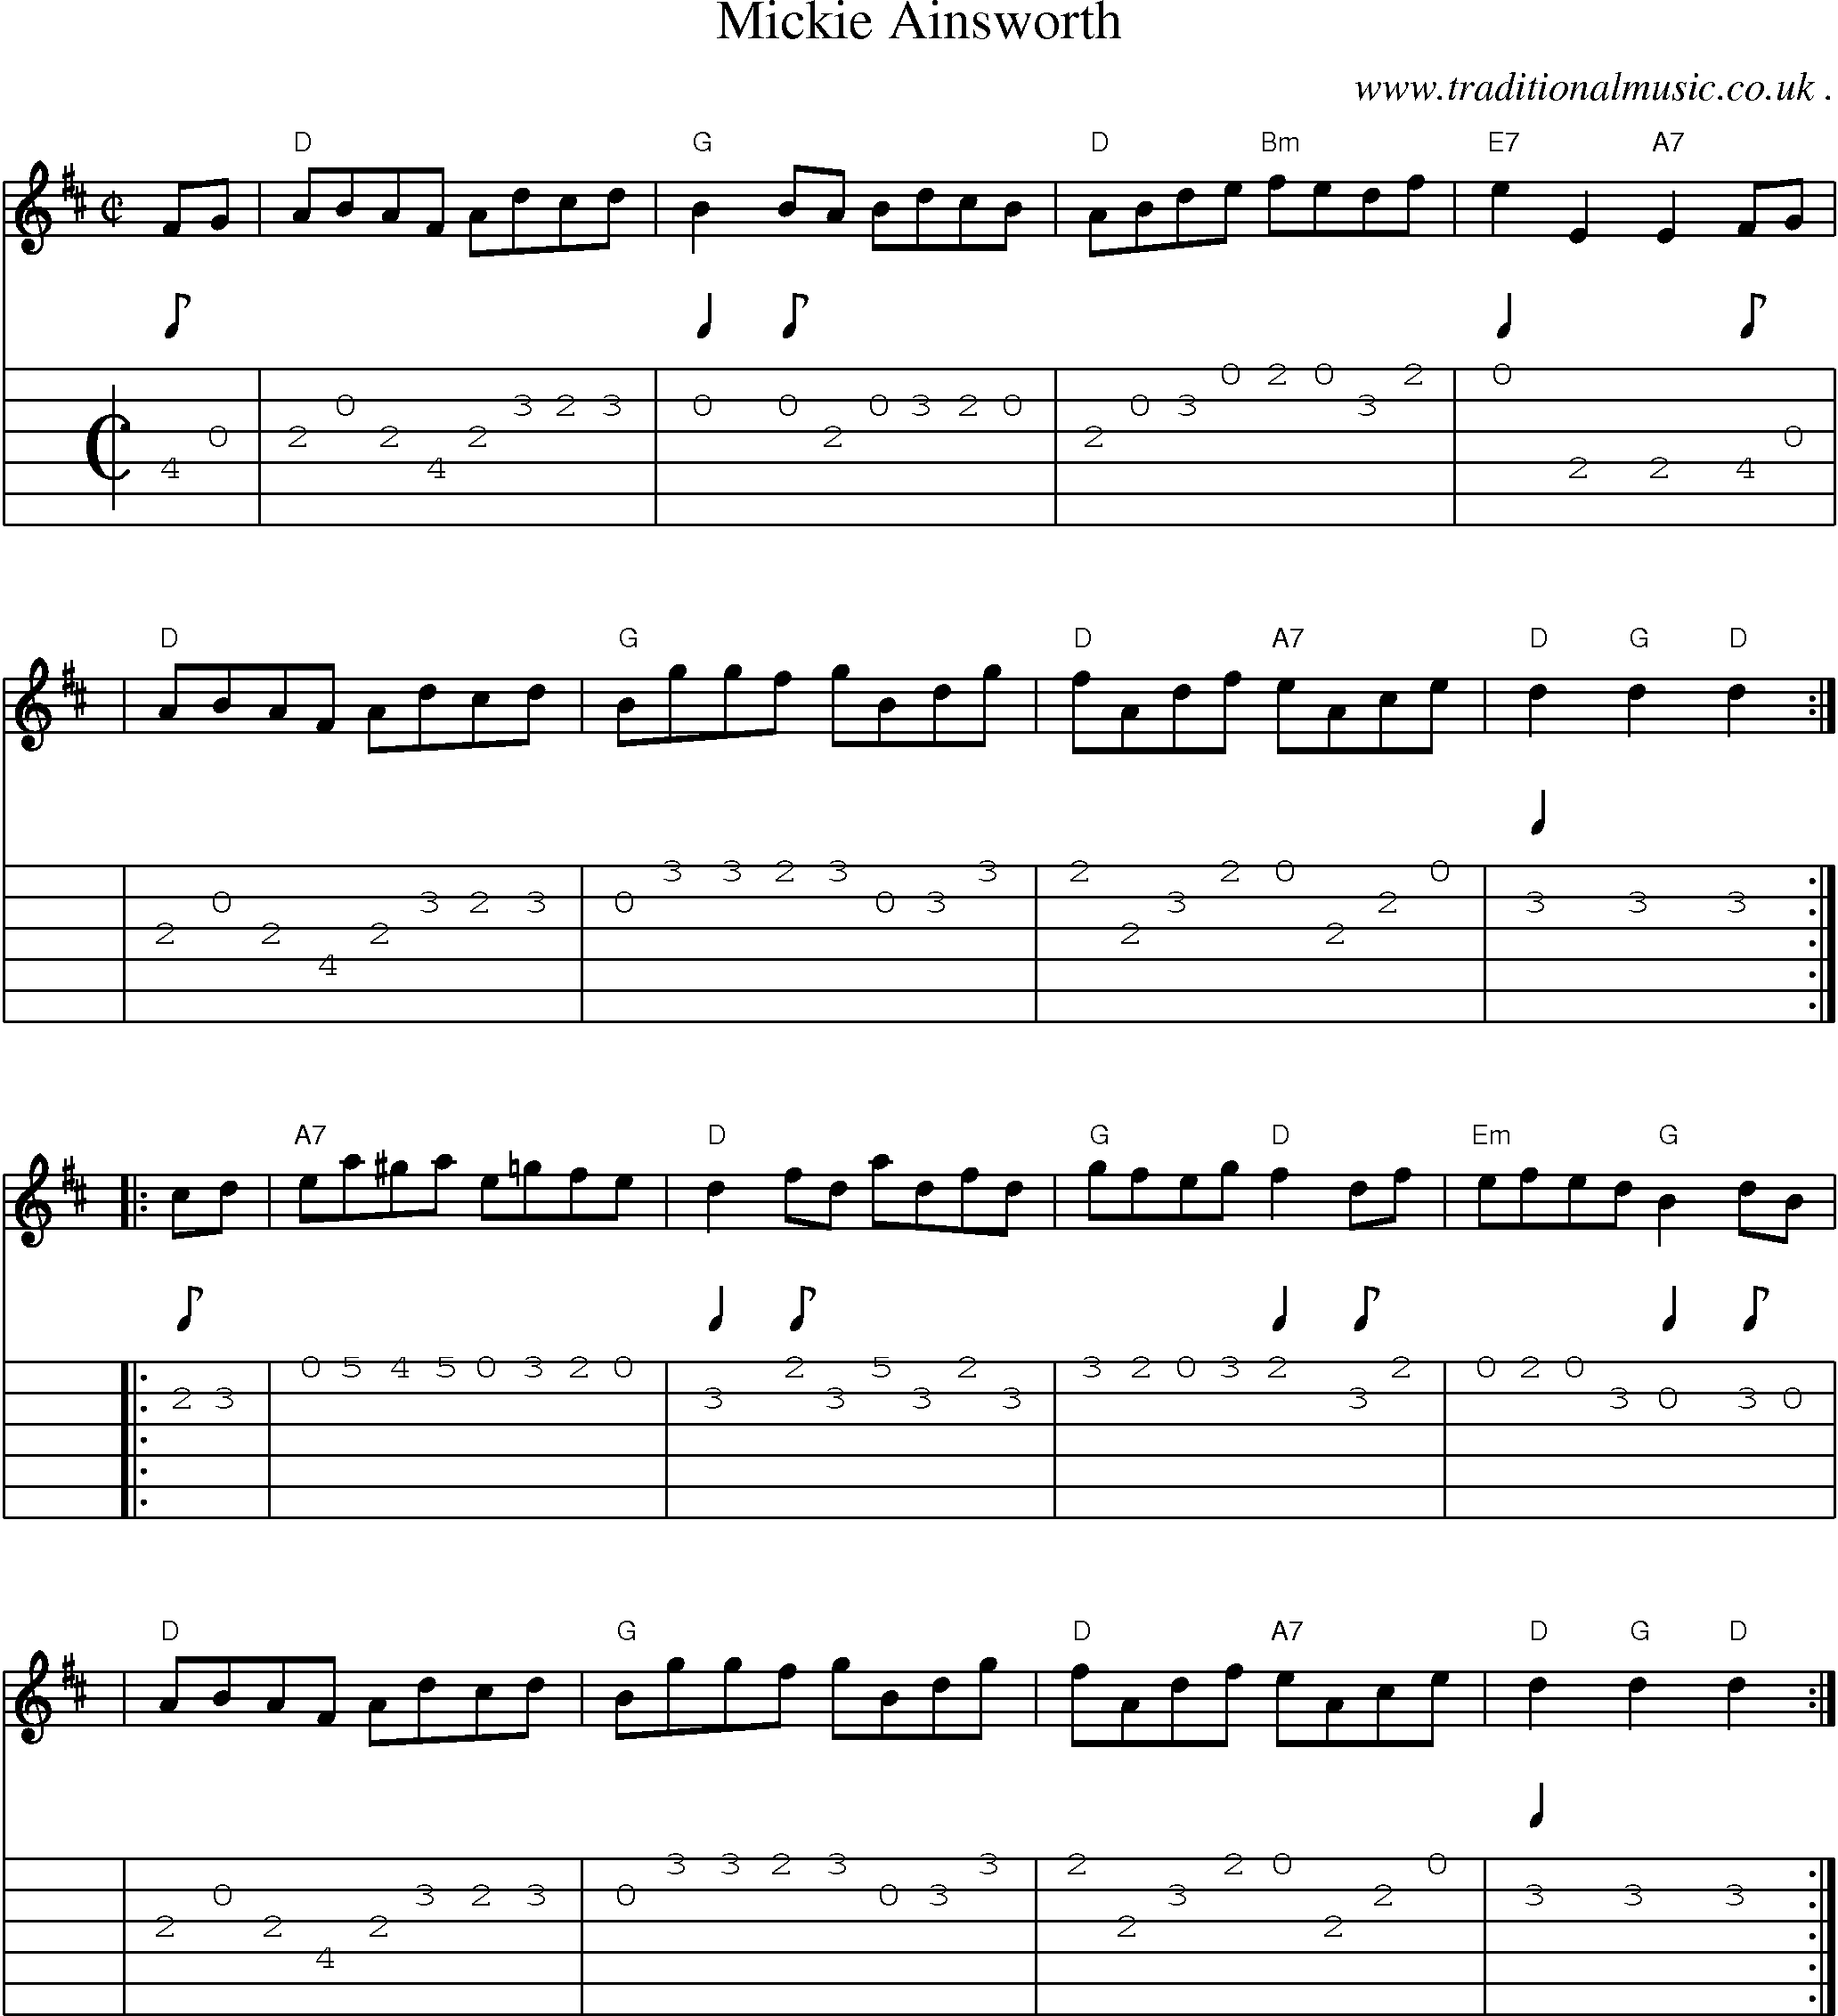 Sheet-music  score, Chords and Guitar Tabs for Mickie Ainsworth